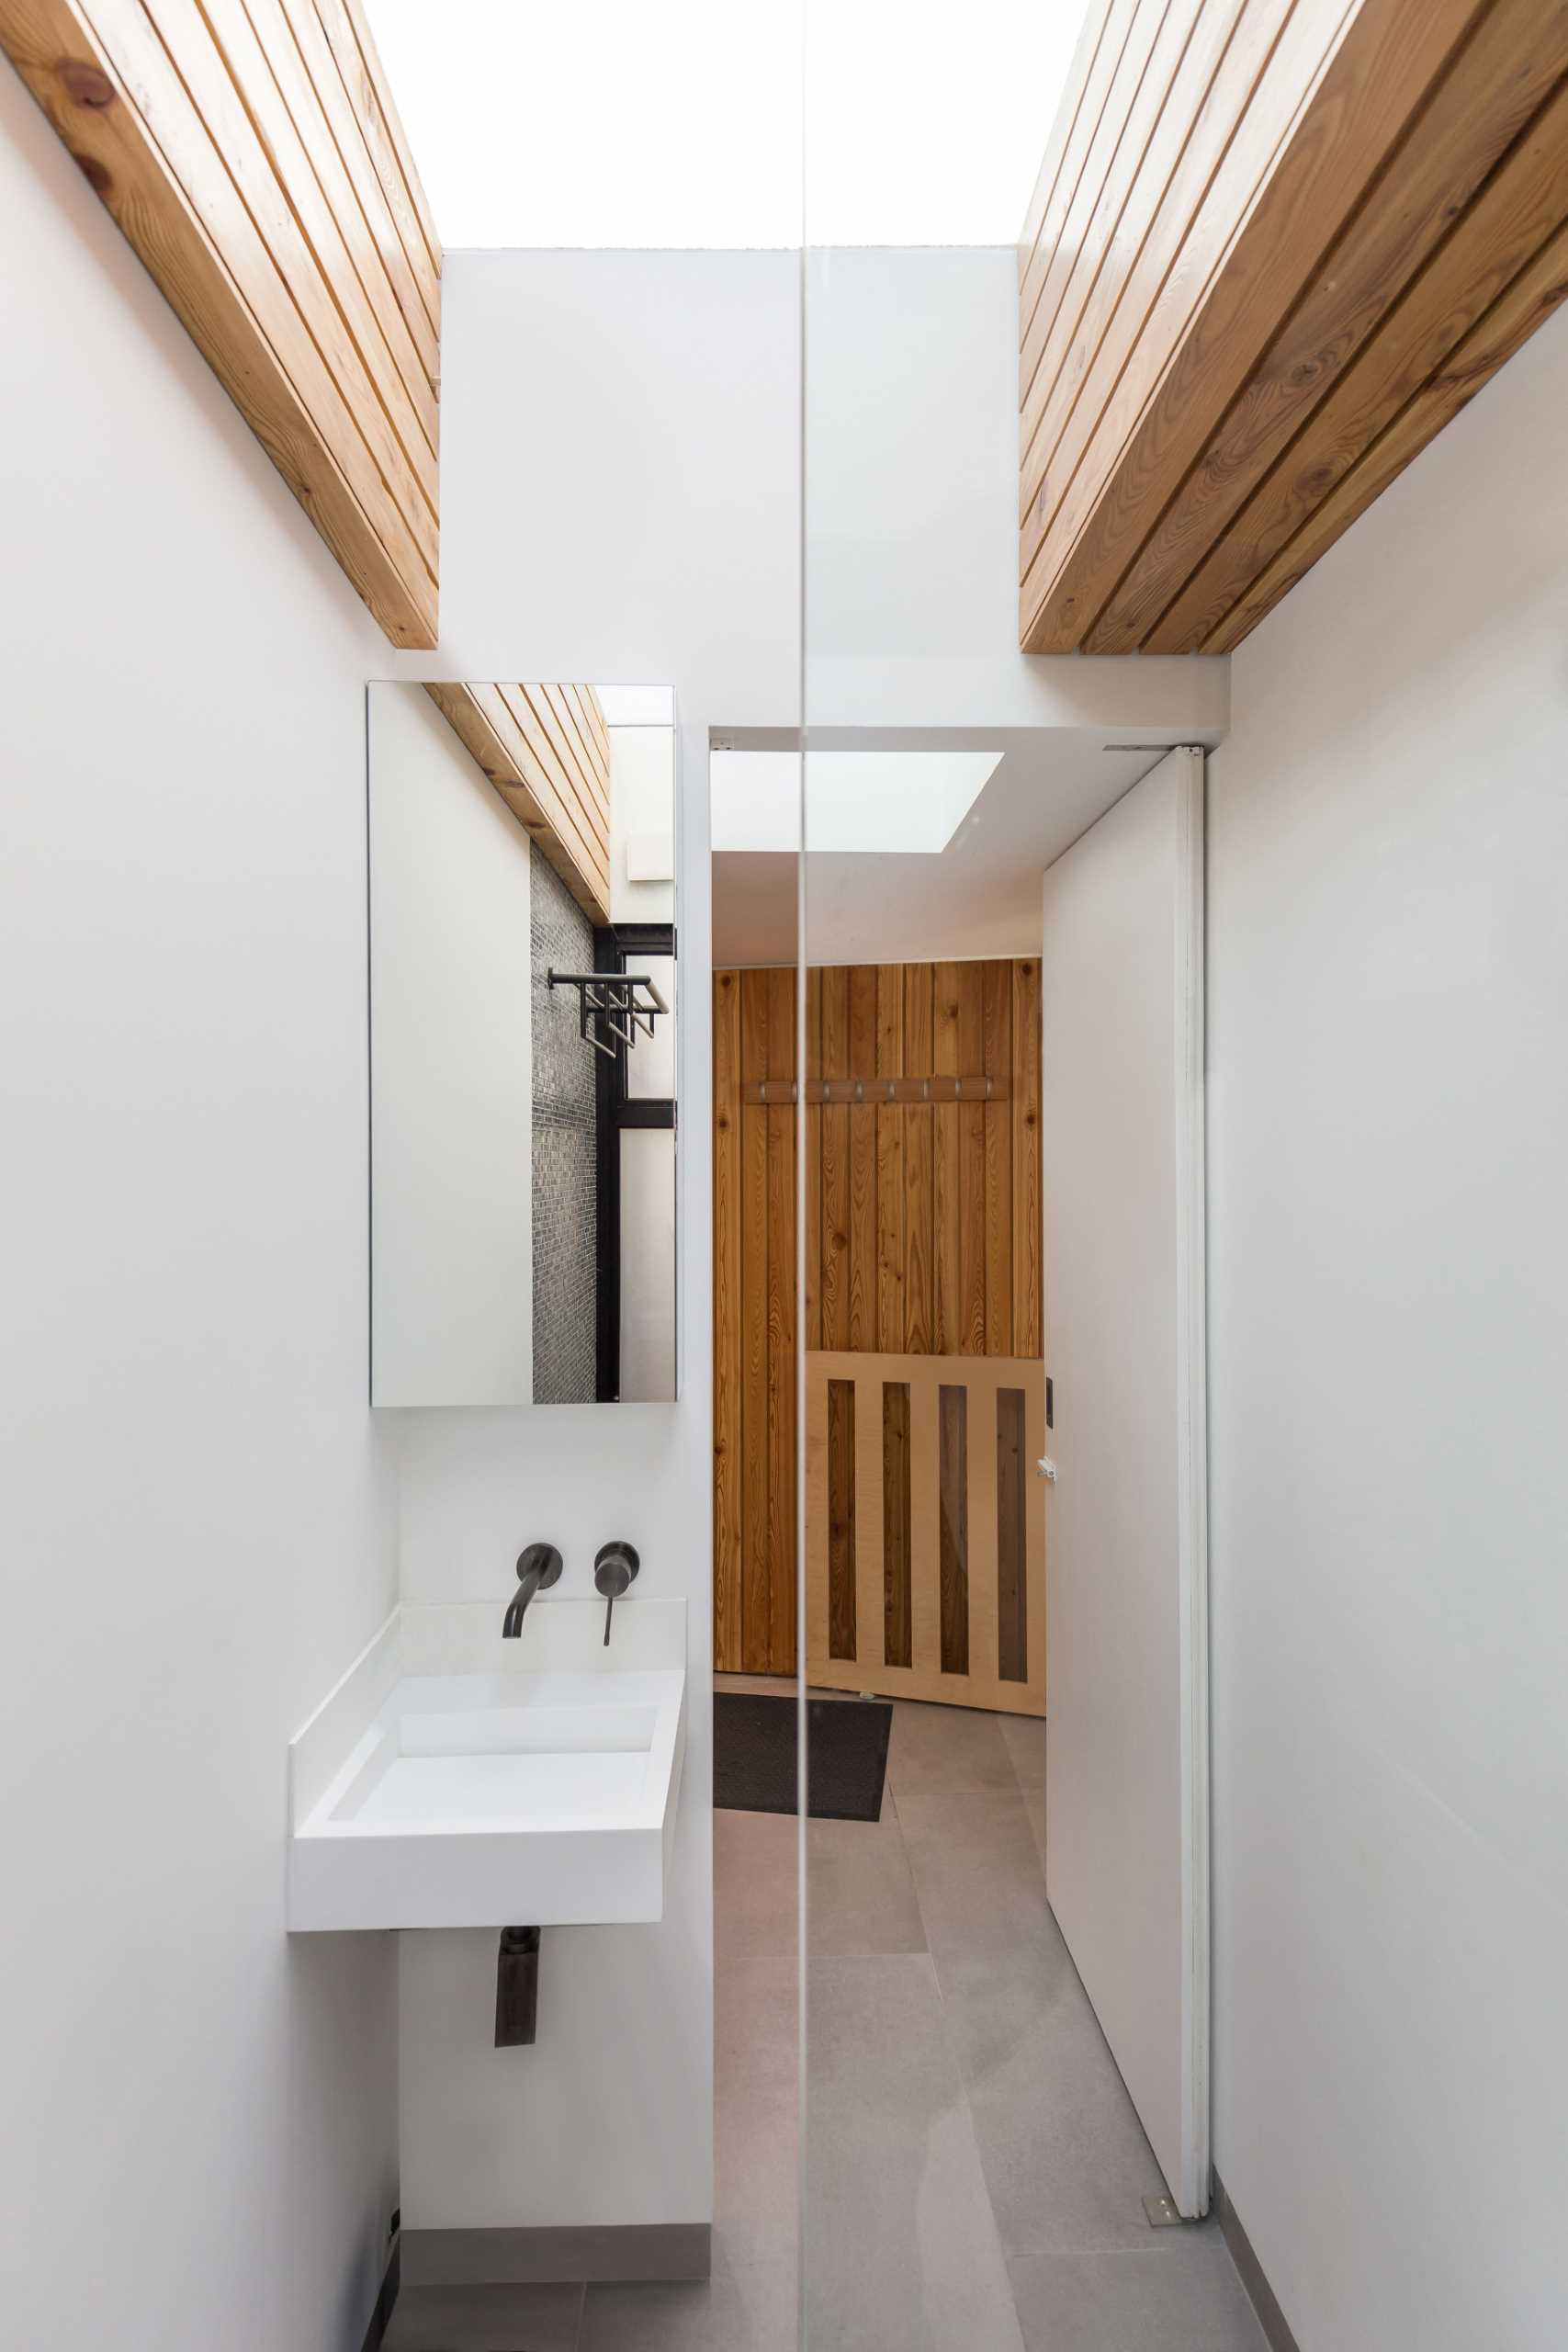 A small bathroom with a shower and a skylight.